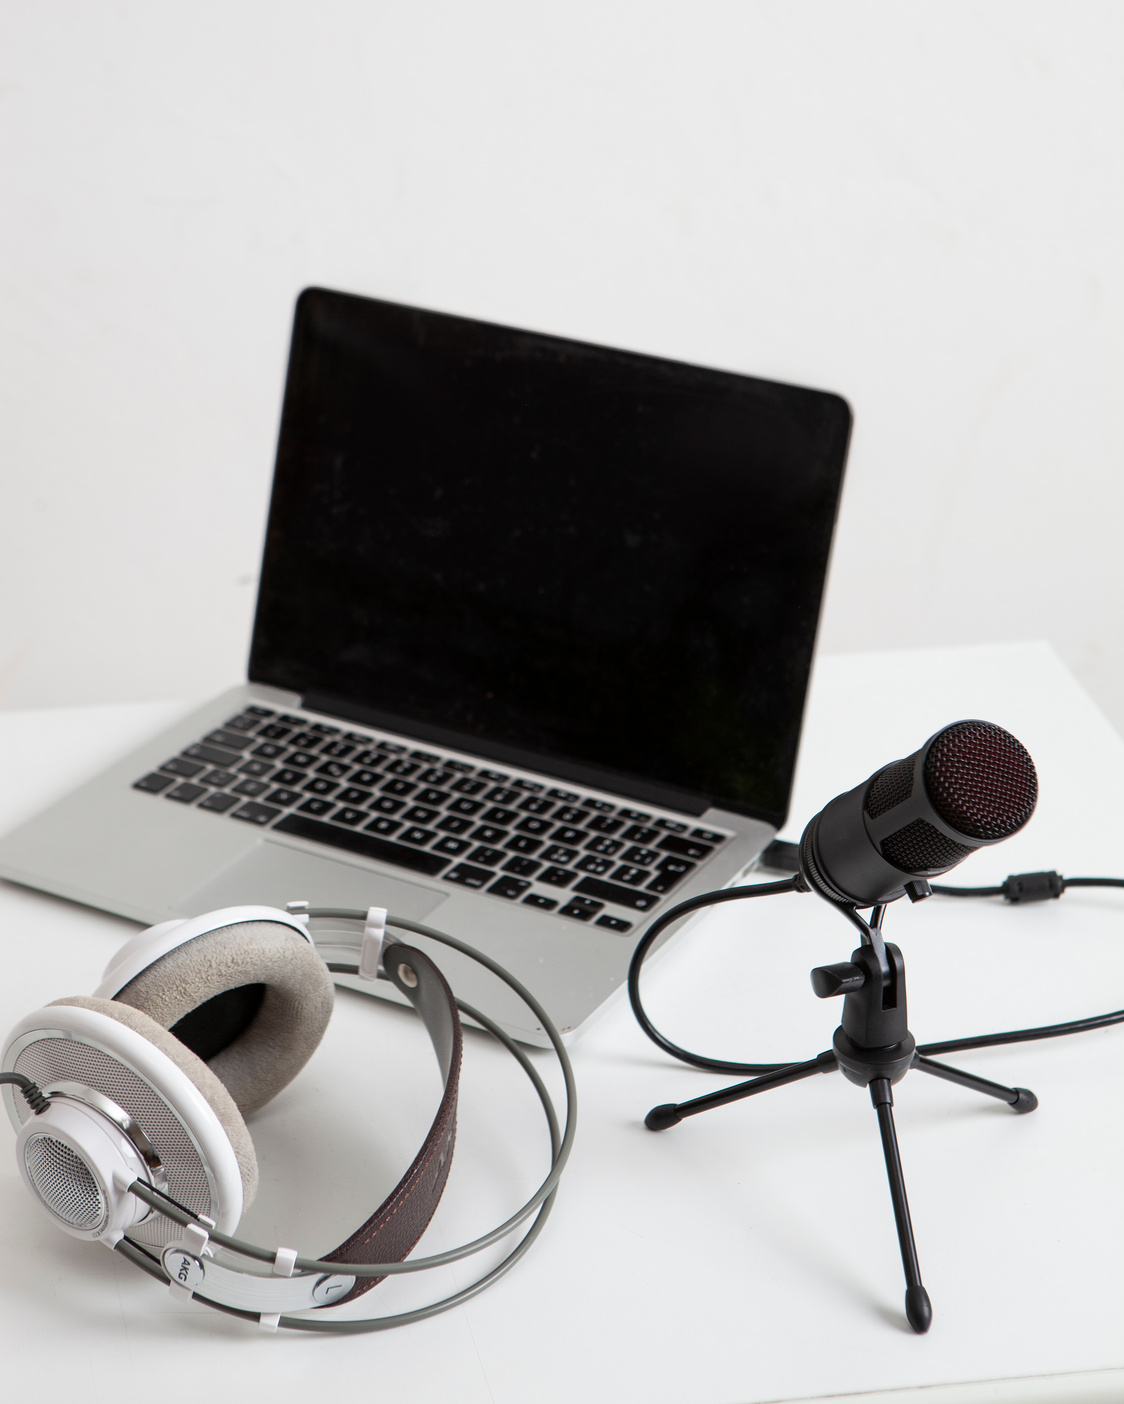 Headphones, Microphone and Laptop on White Desk